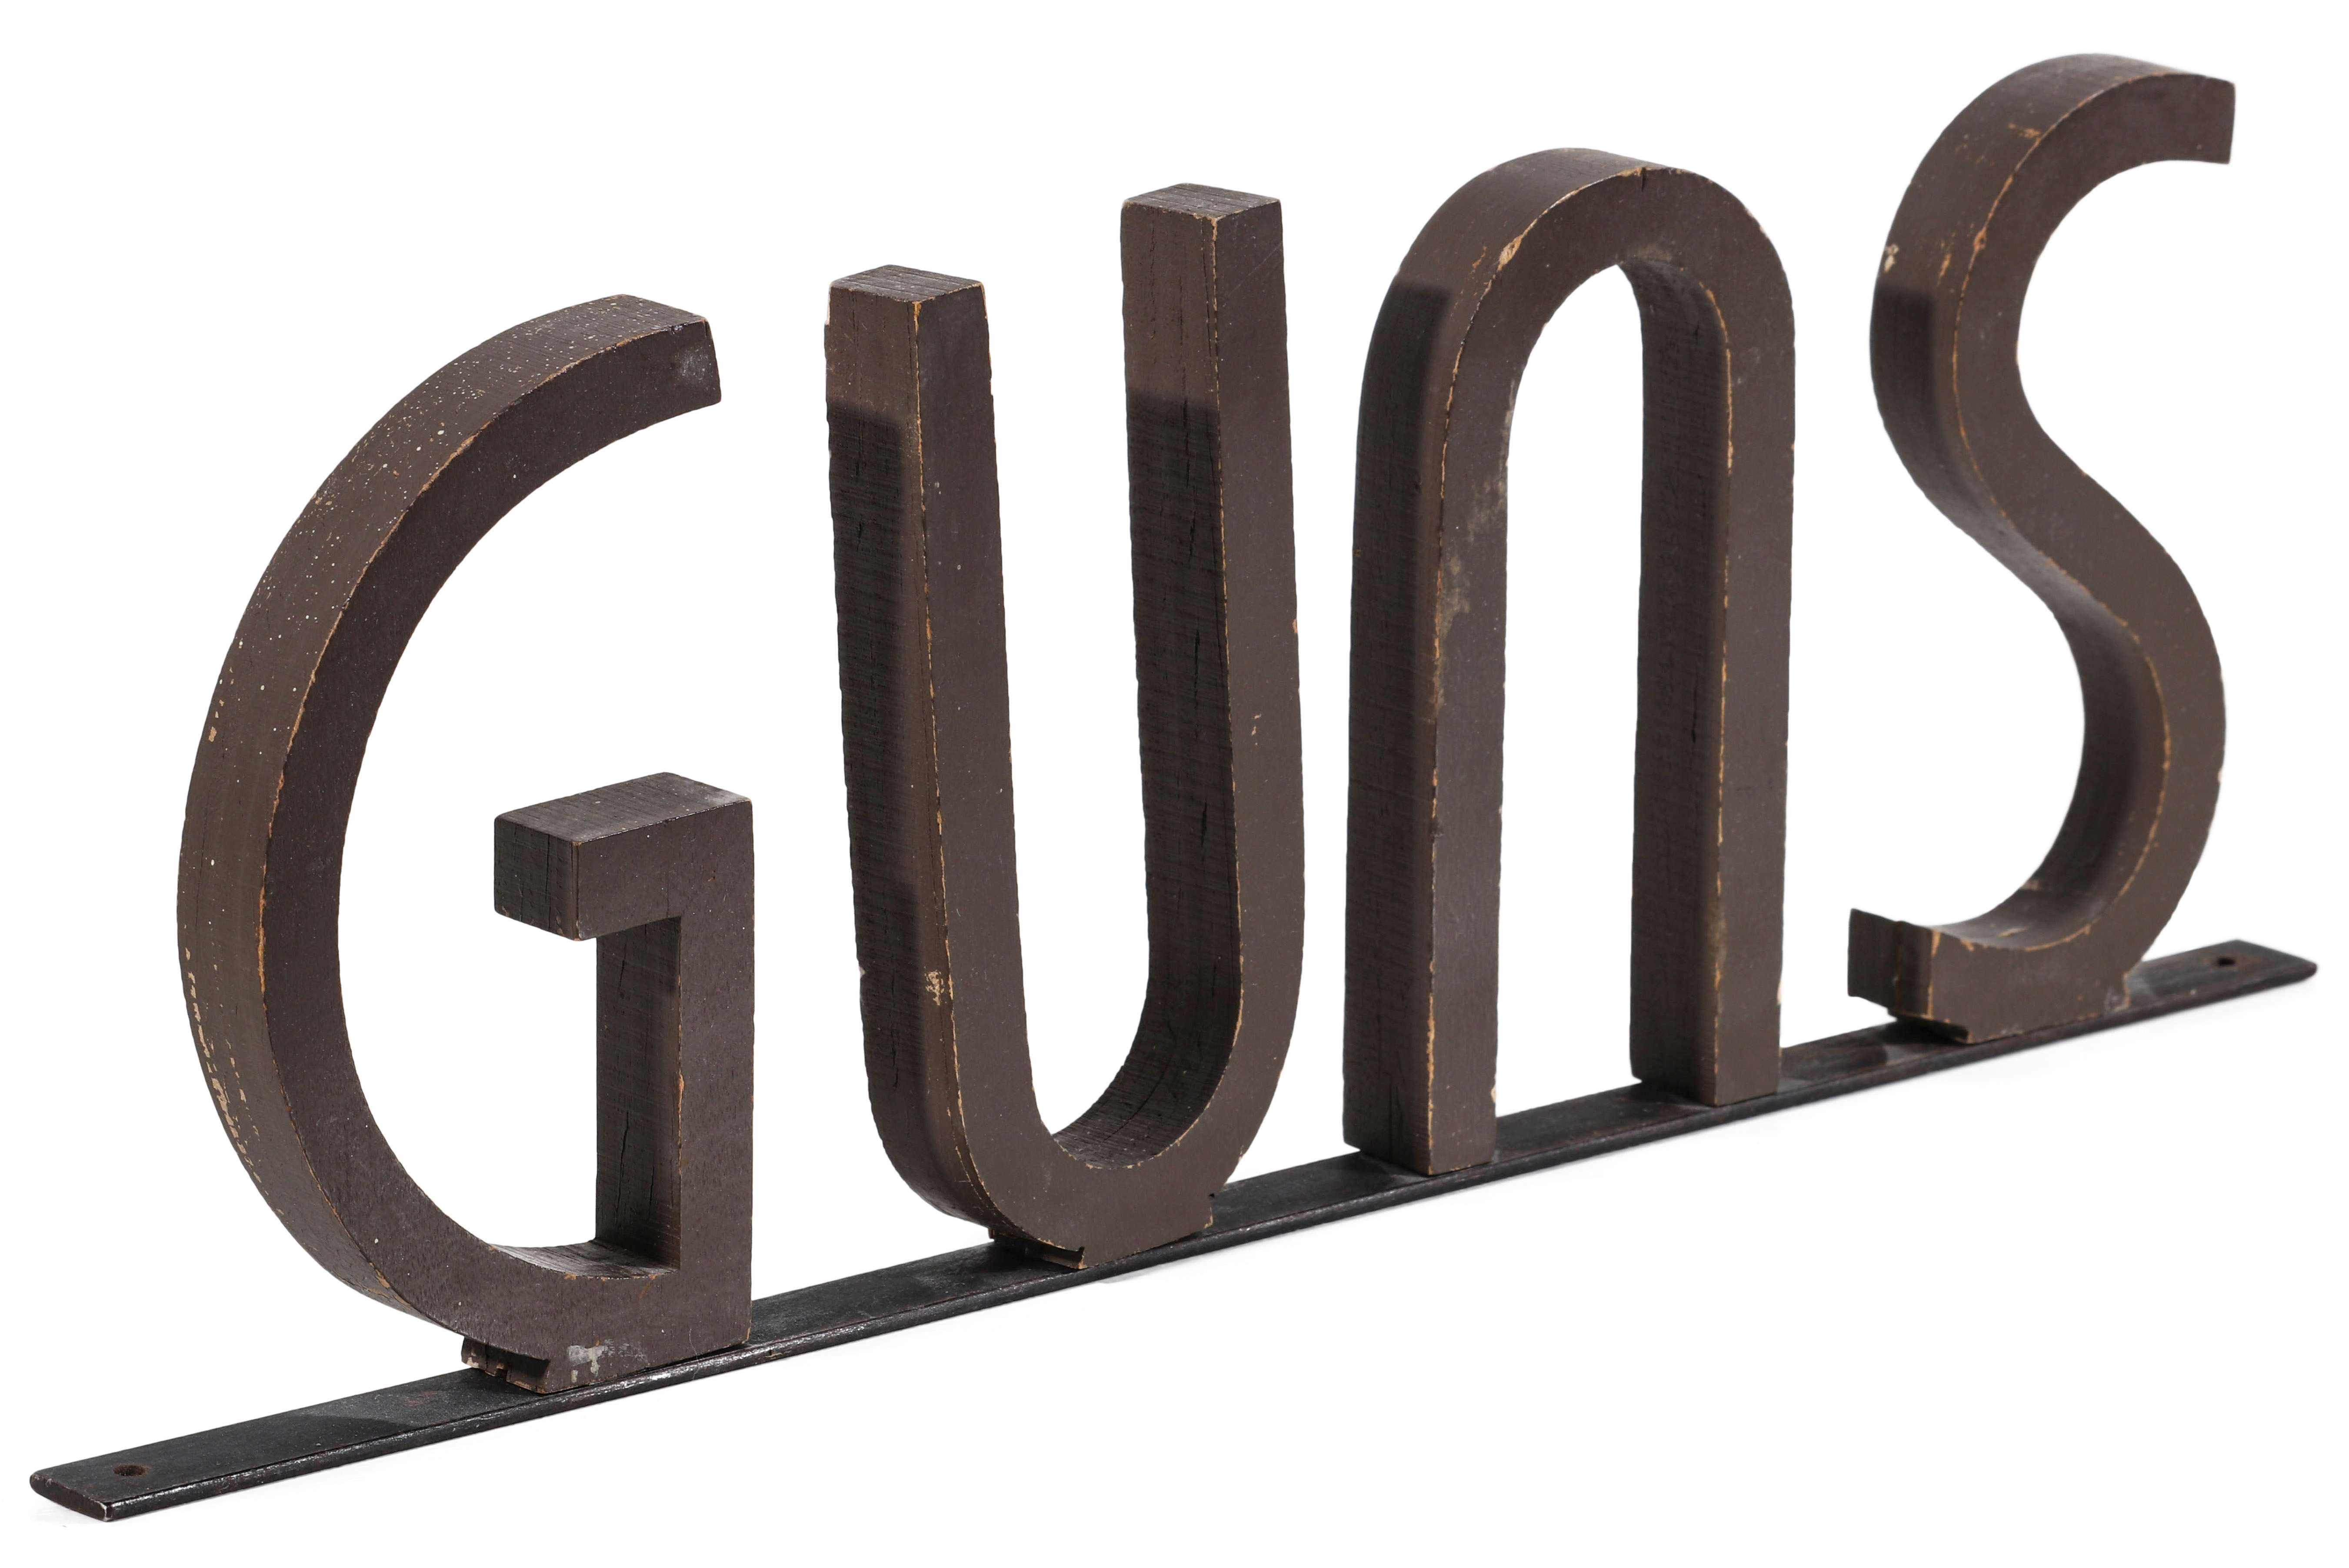 A CIRCA 1930s PAINTED WOOD LETTER GUNS SIGN